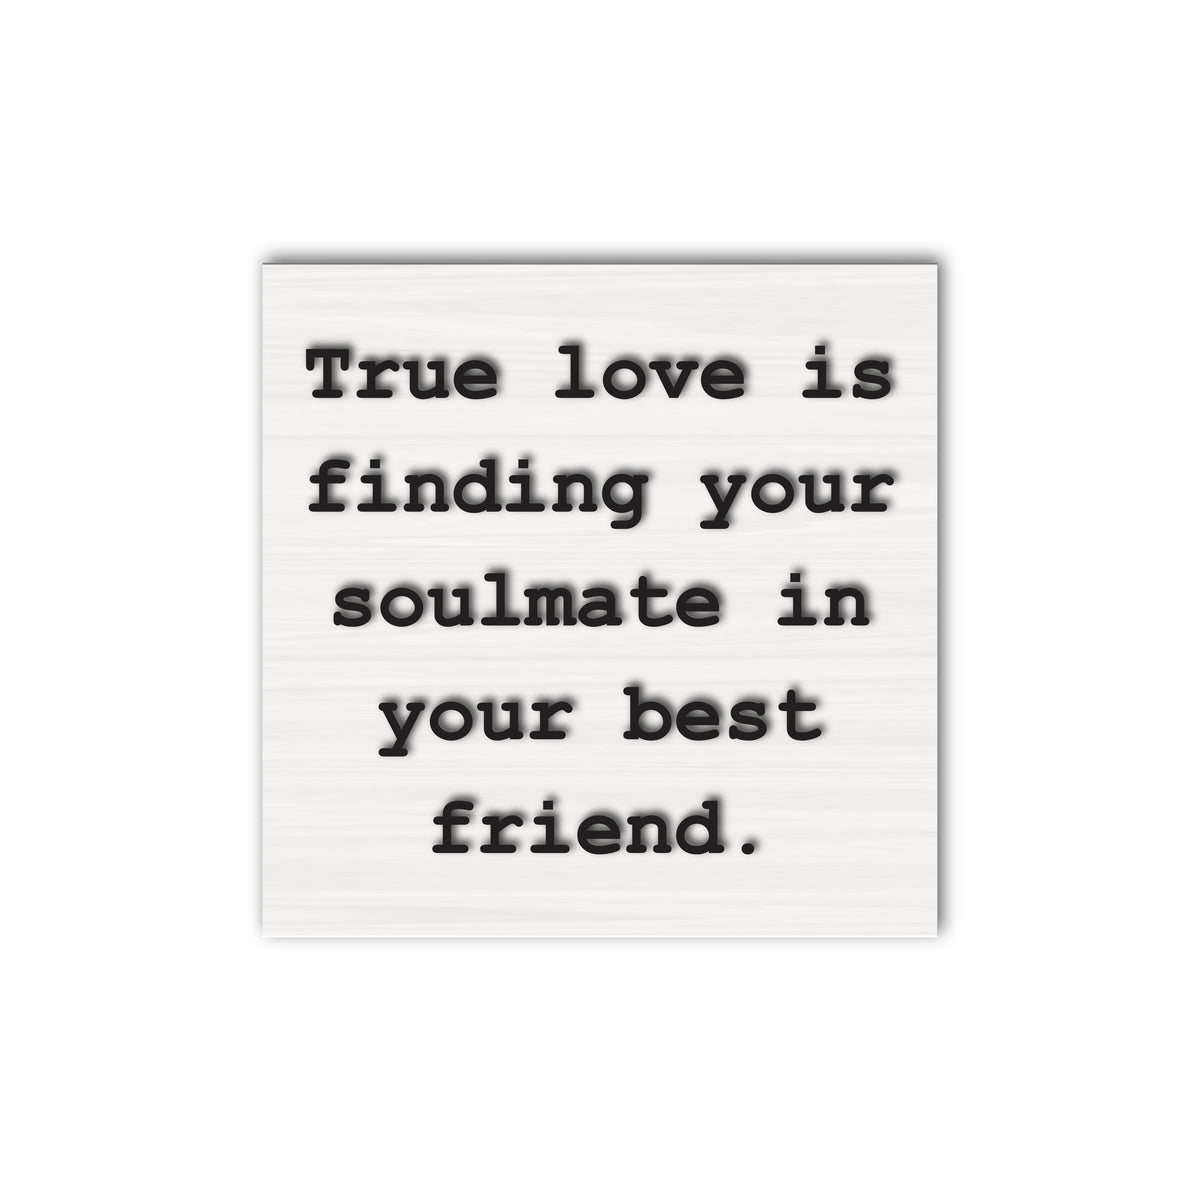 Soulmate And Love Quotes: True Love, Soulmate and Love Quot…